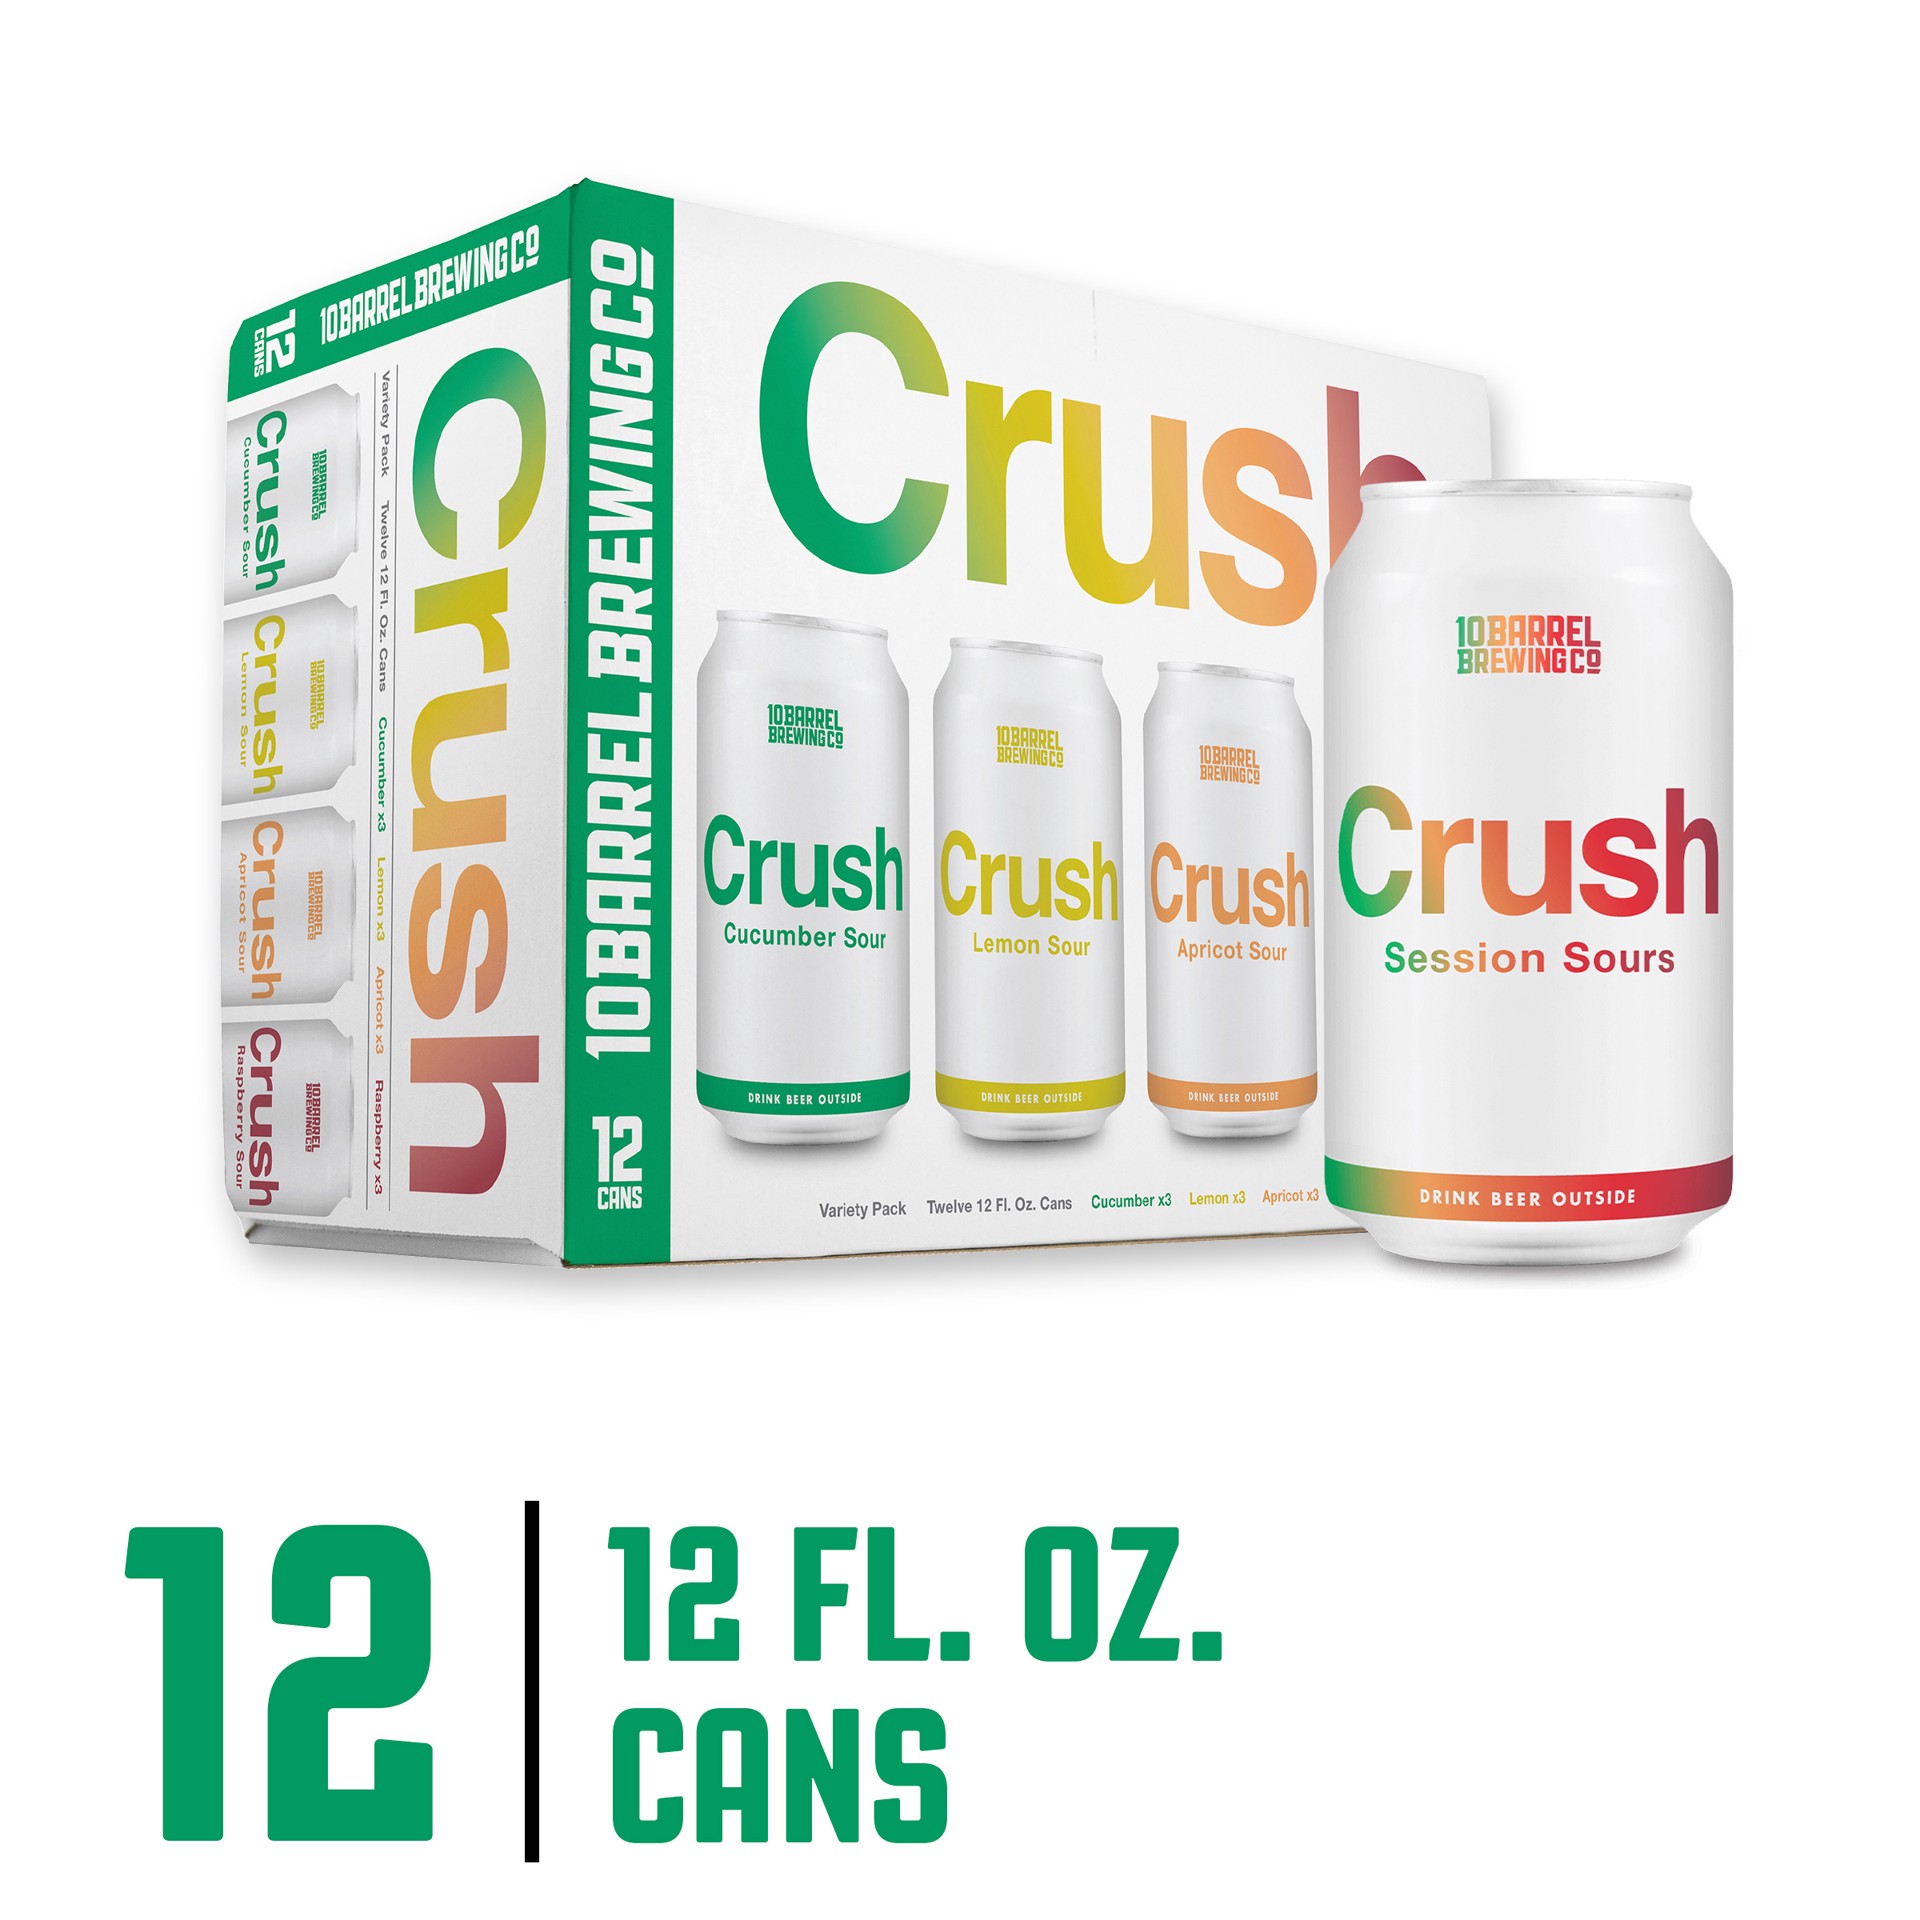 slide 3 of 3, 10 Barrel Brewing Co. Crush Variety Pack, 12Pk, 12 ct